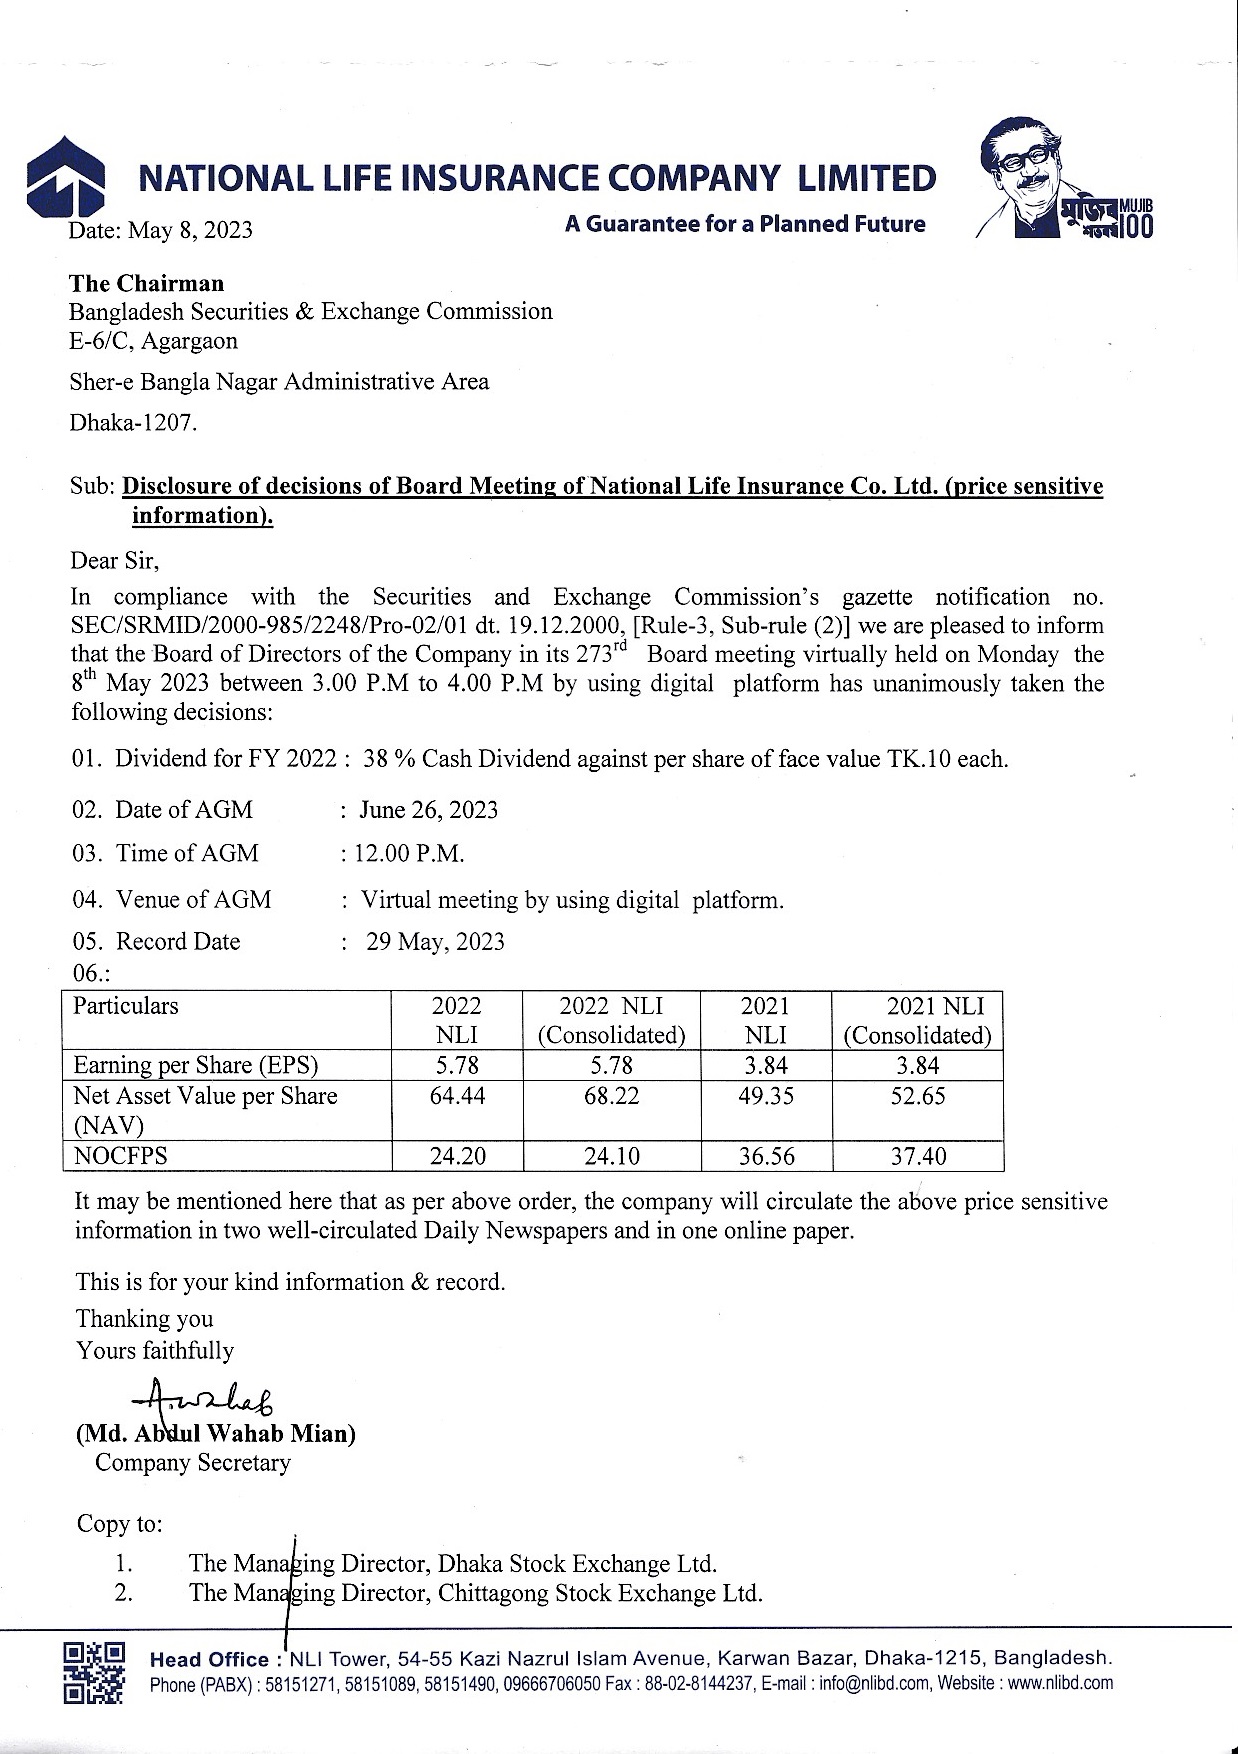 Disclosure of decisions of Board Meeting of National Life Insurance Co. Ltd(Price Sensitive Information)